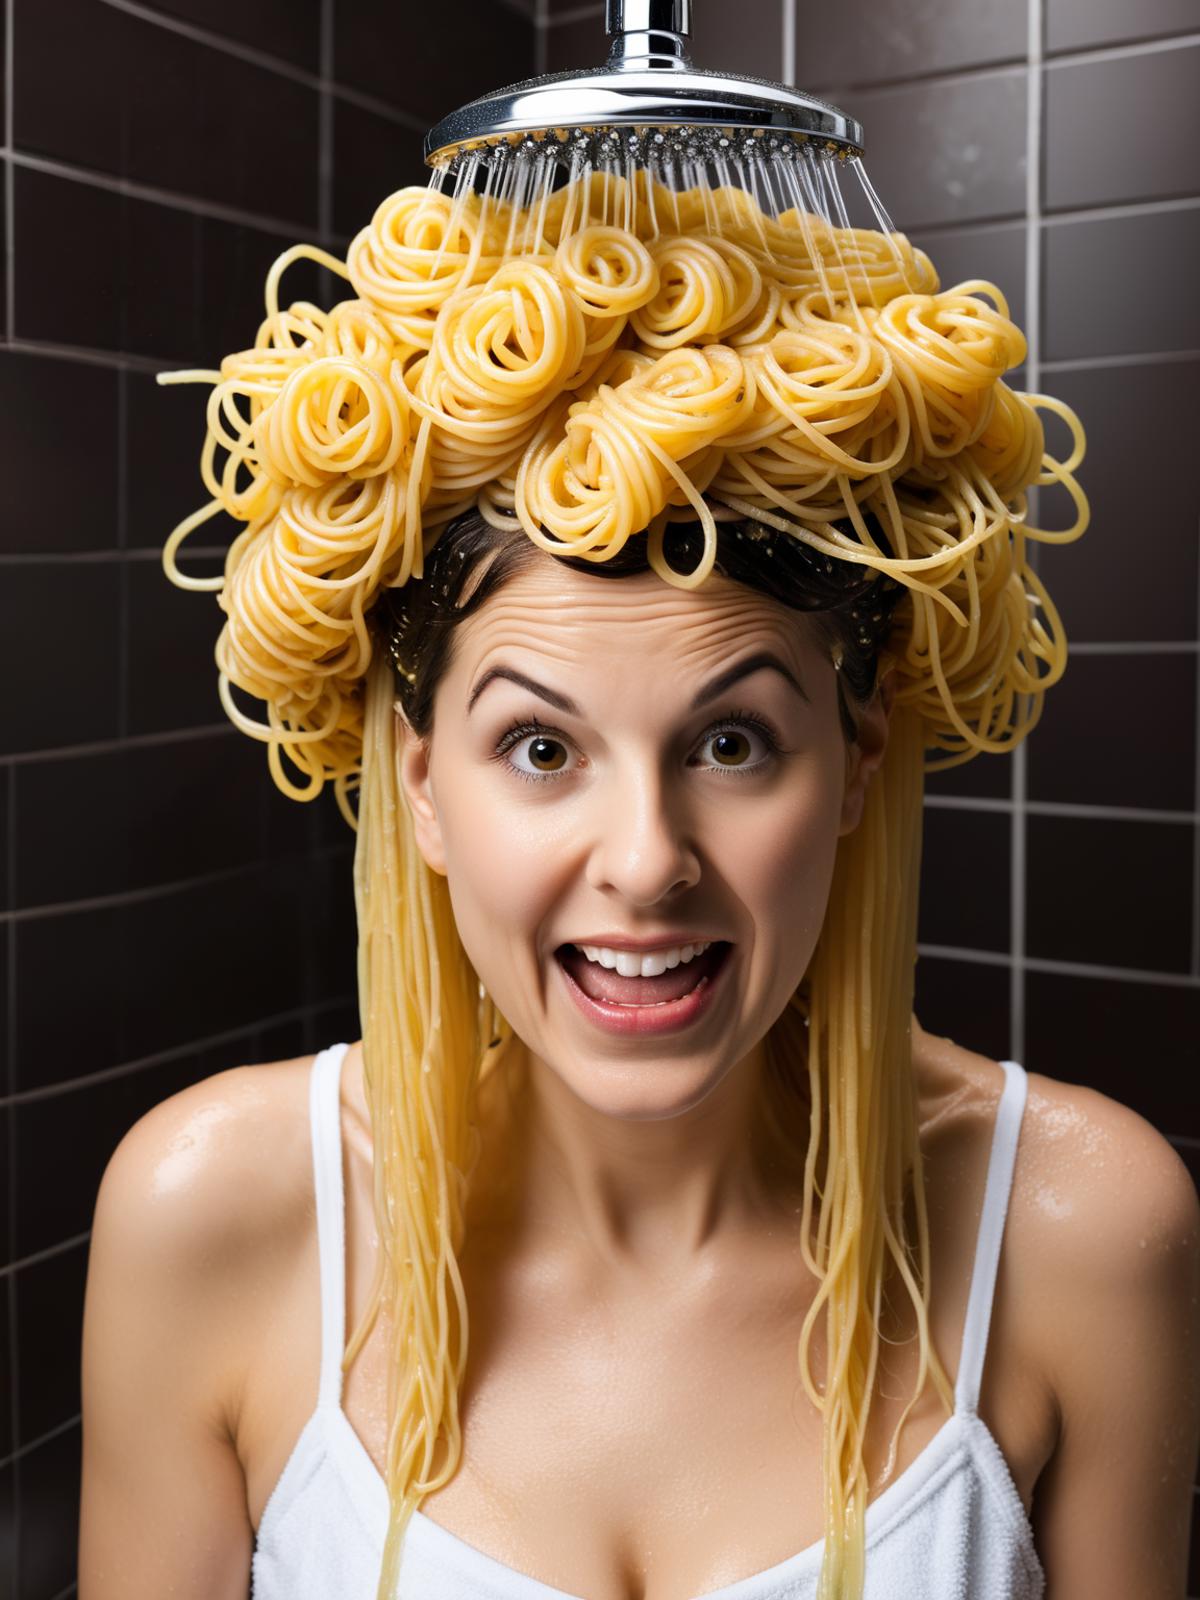 A woman with curly hair wearing a noodle crown and smiling.